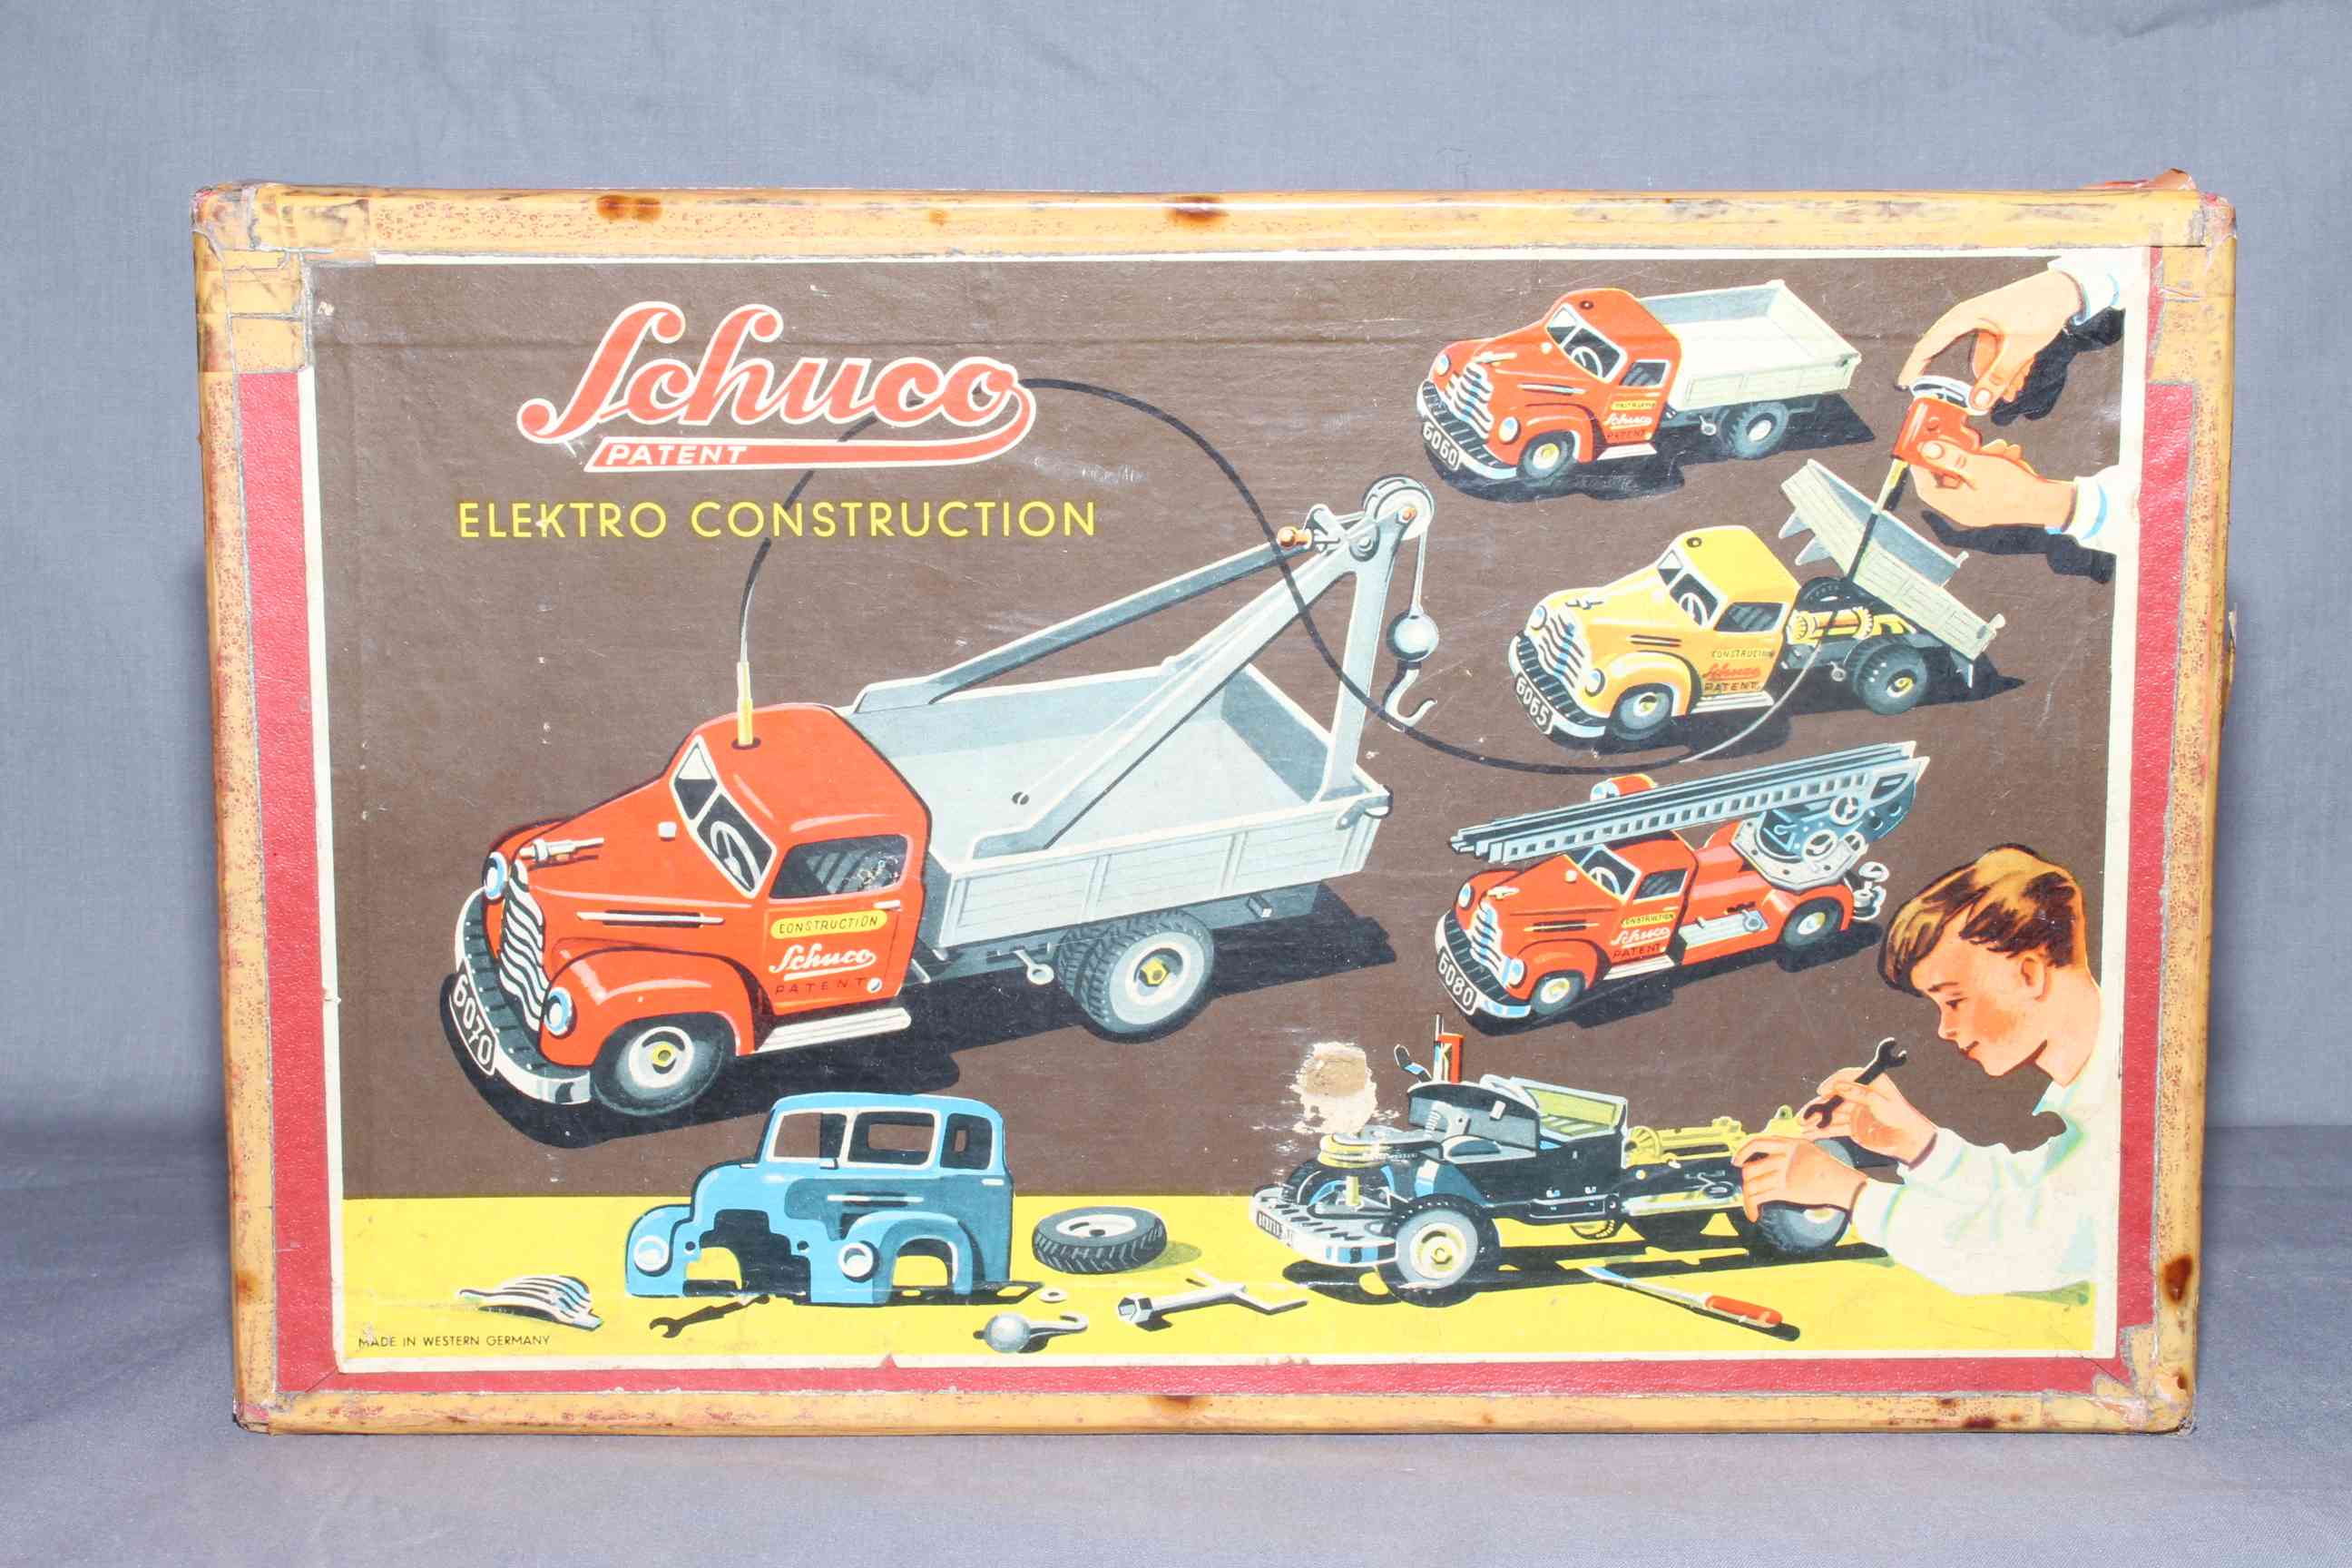 Schuco Electro Construction Truck complete with accessories. Paint loss to top of bonnet and roof. - Image 2 of 2